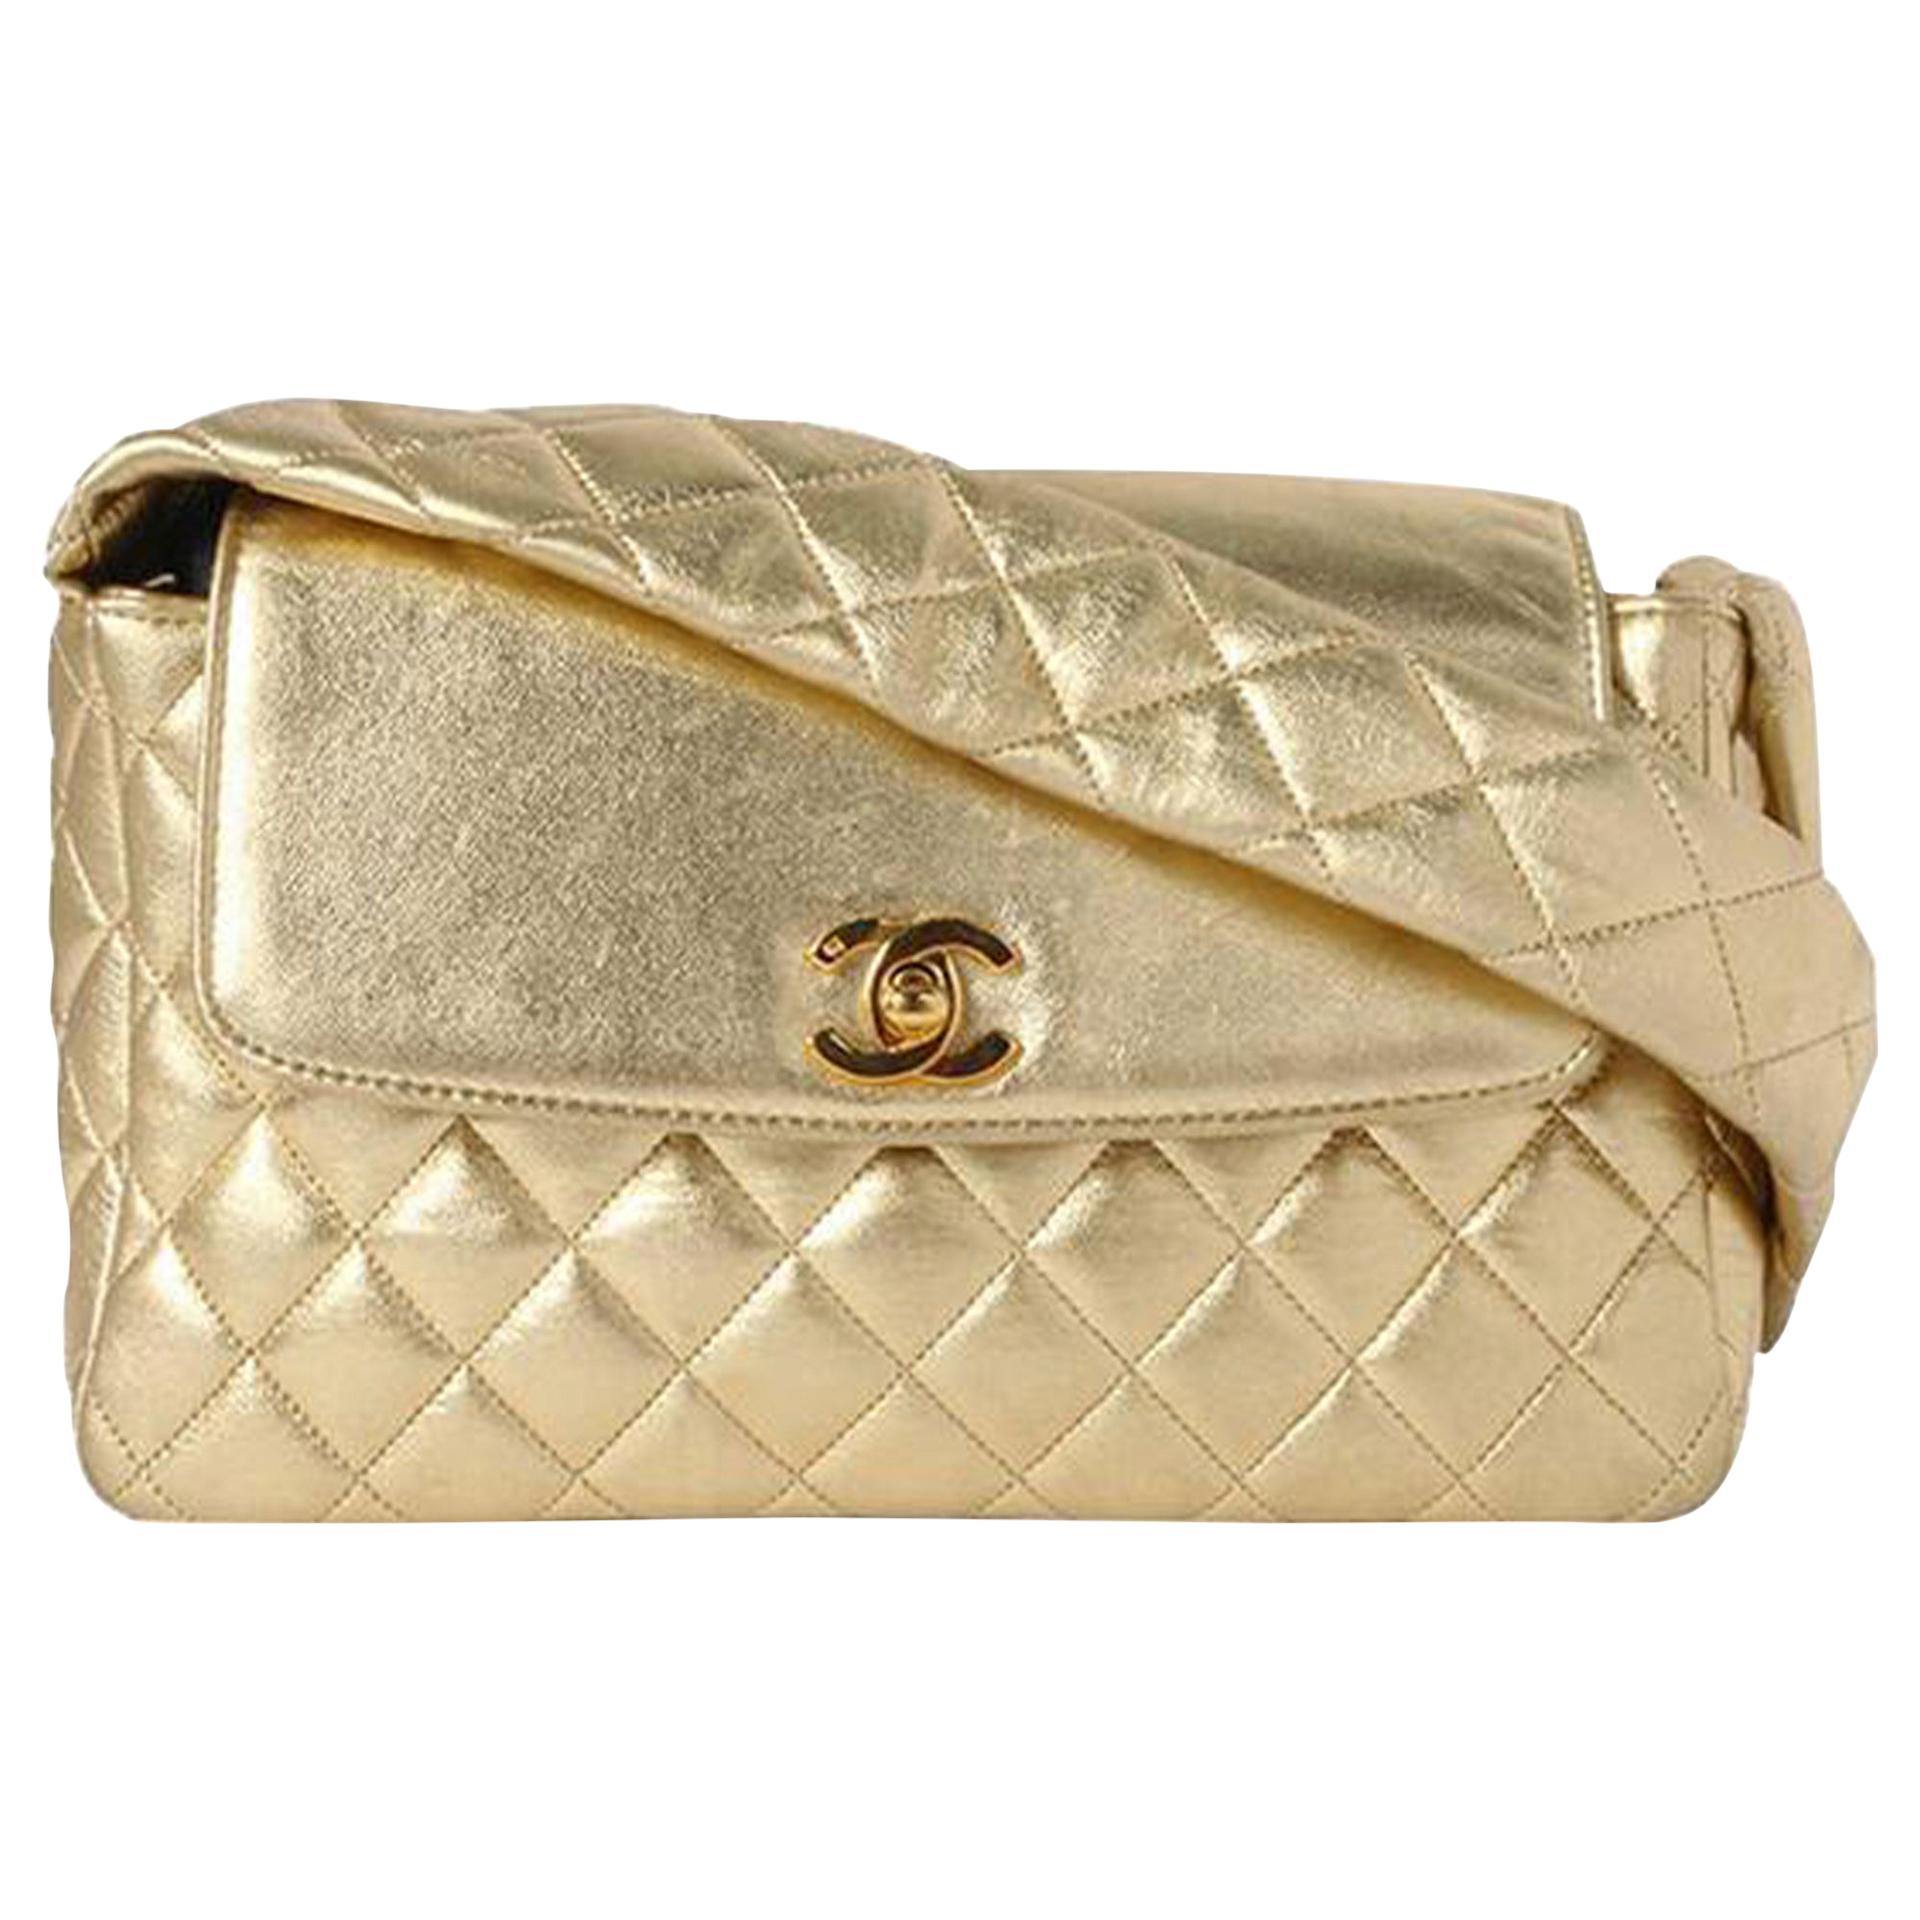 Chanel 1994 Top Handle Rare Limited Edition Quilted Flap Gold Metallic Bag